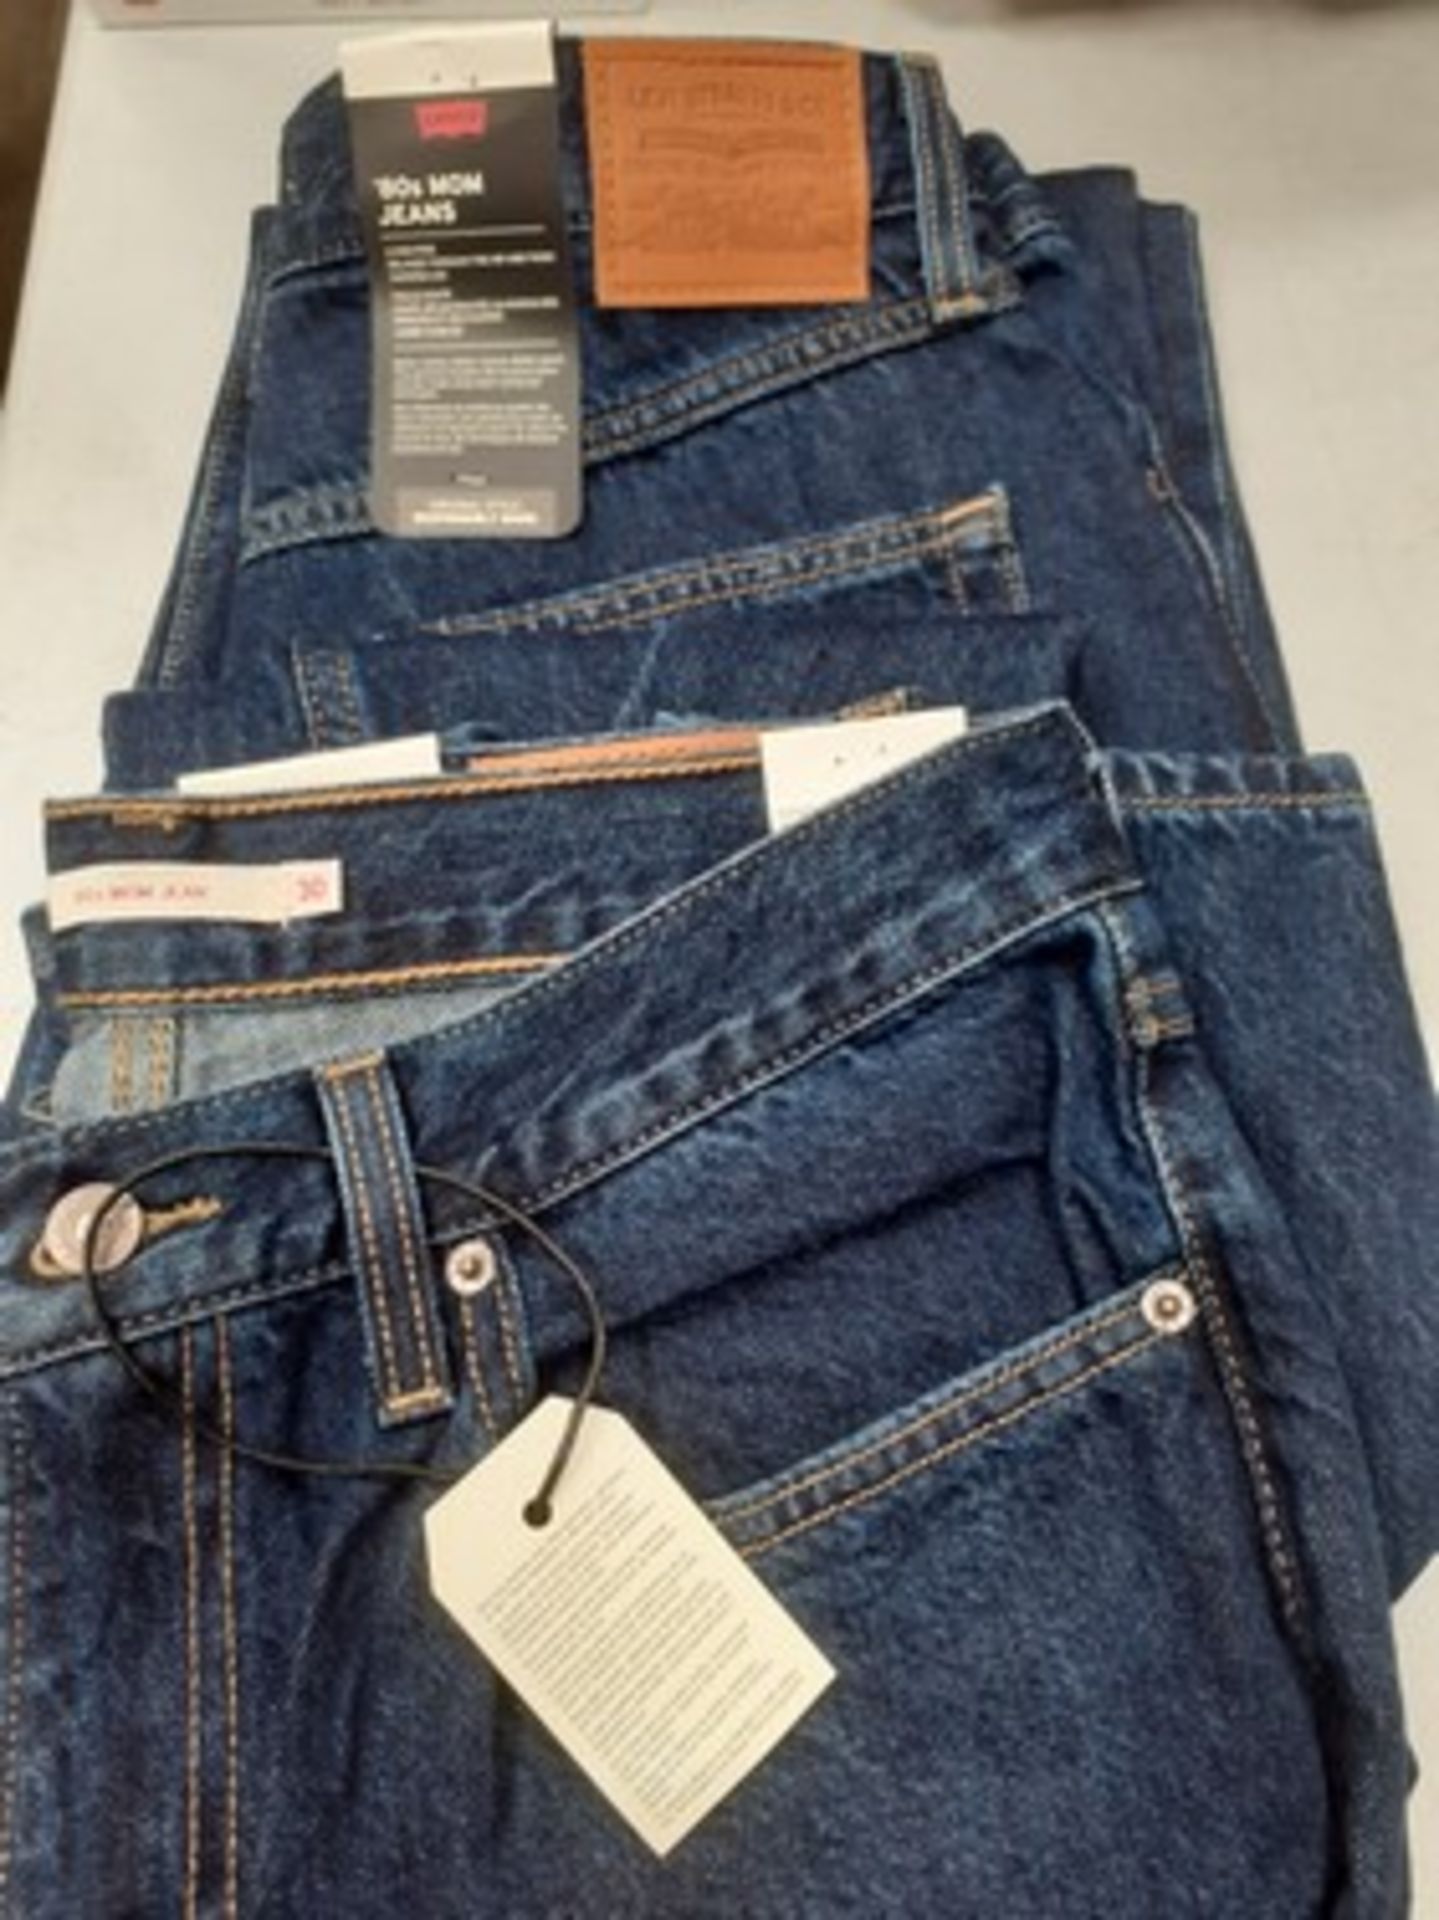 2 x pairs of Levis 80's Mom jeans, sizes 30 x 30 - new with tags (E8B)